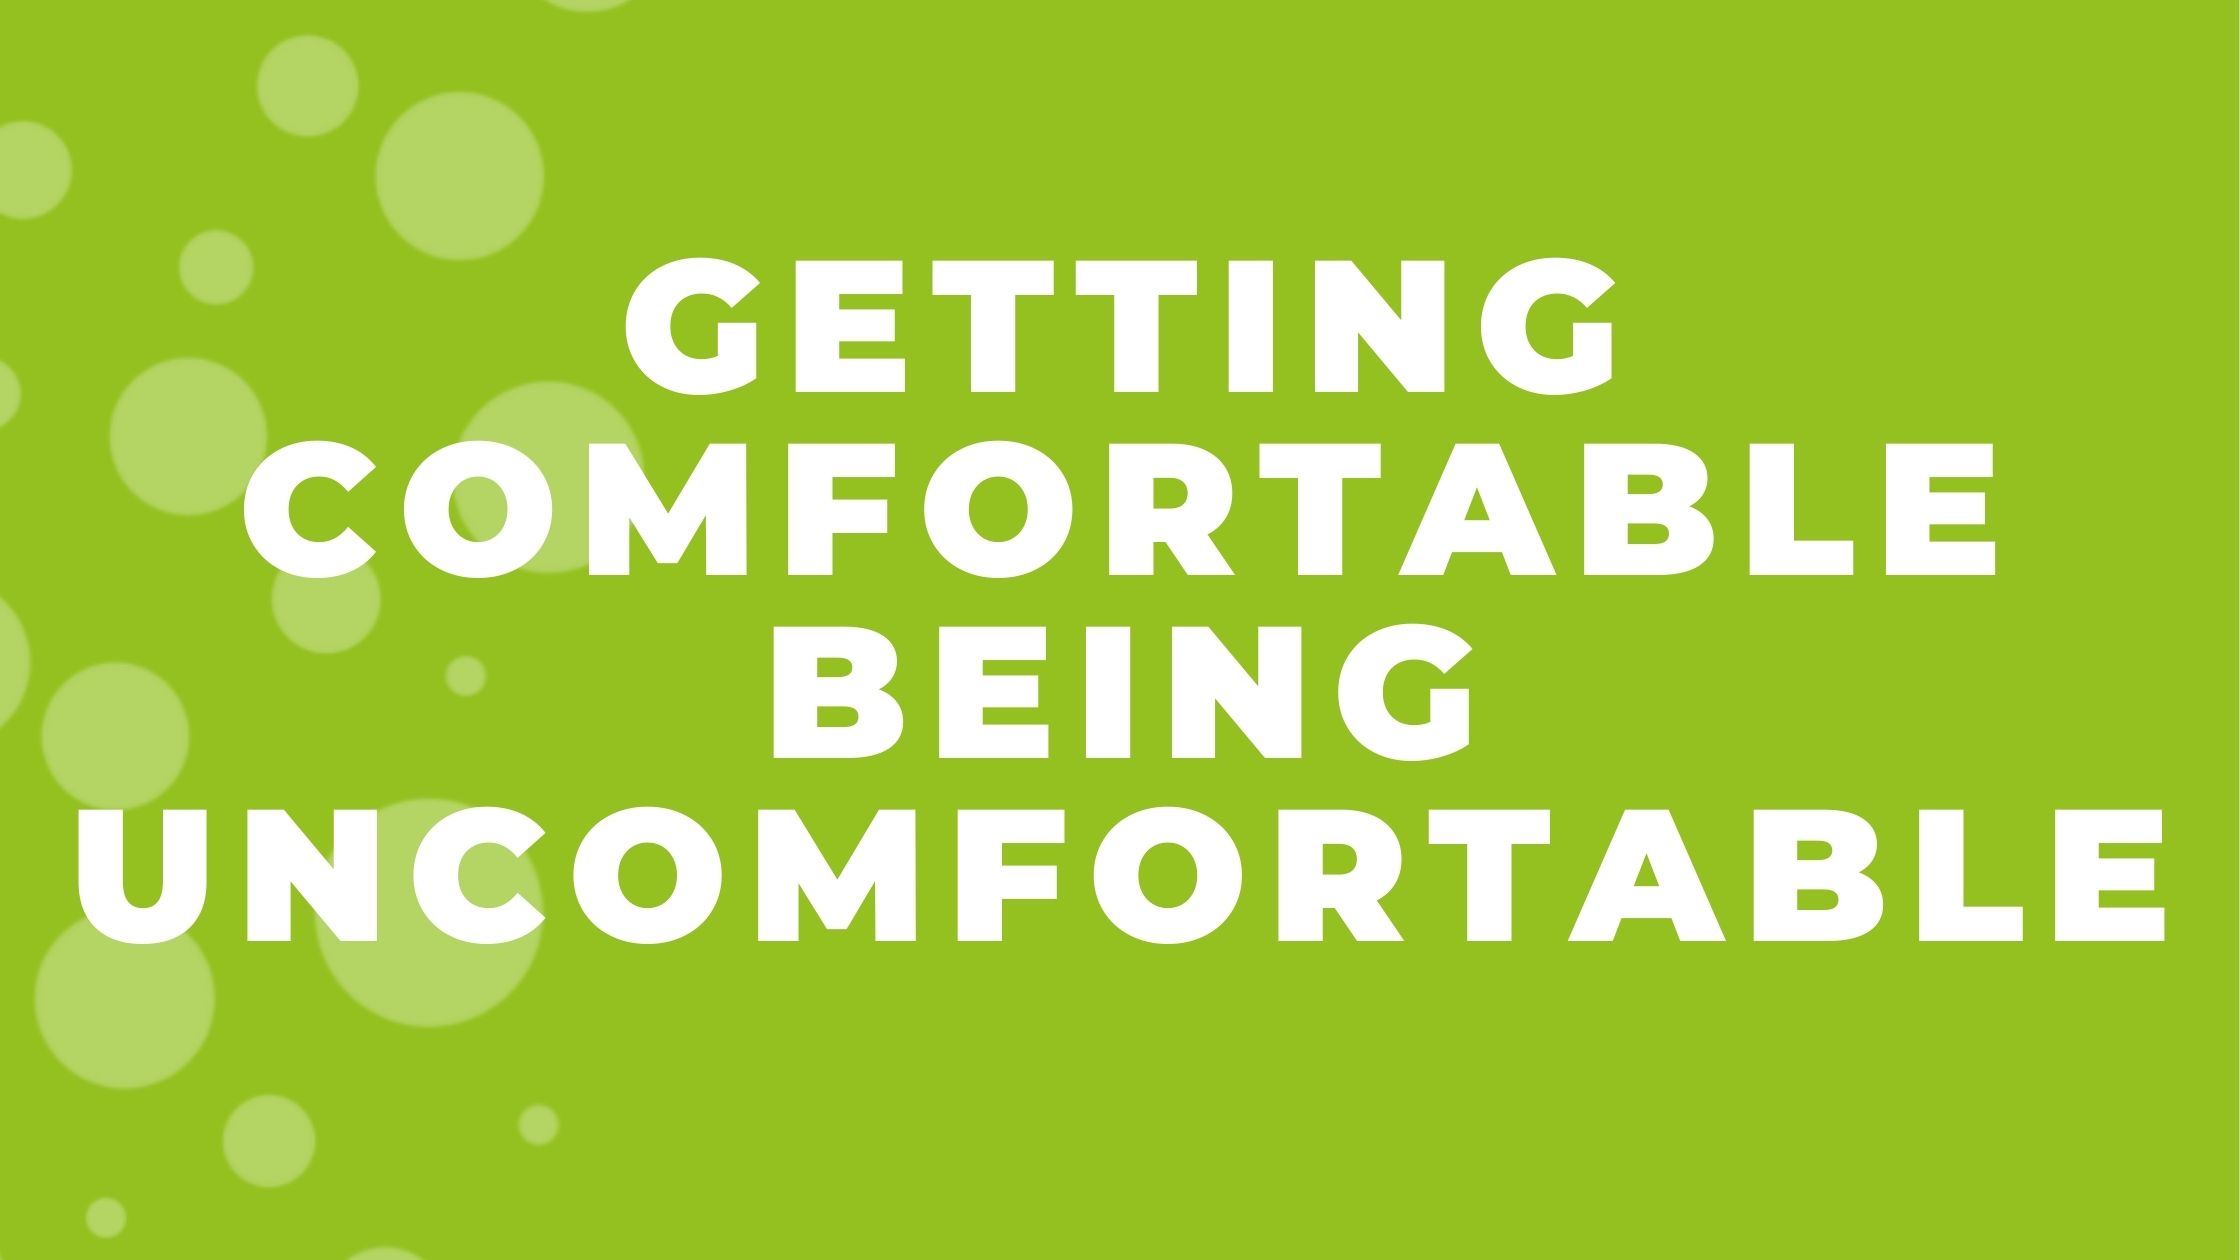 Getting comfortable being uncomfortable